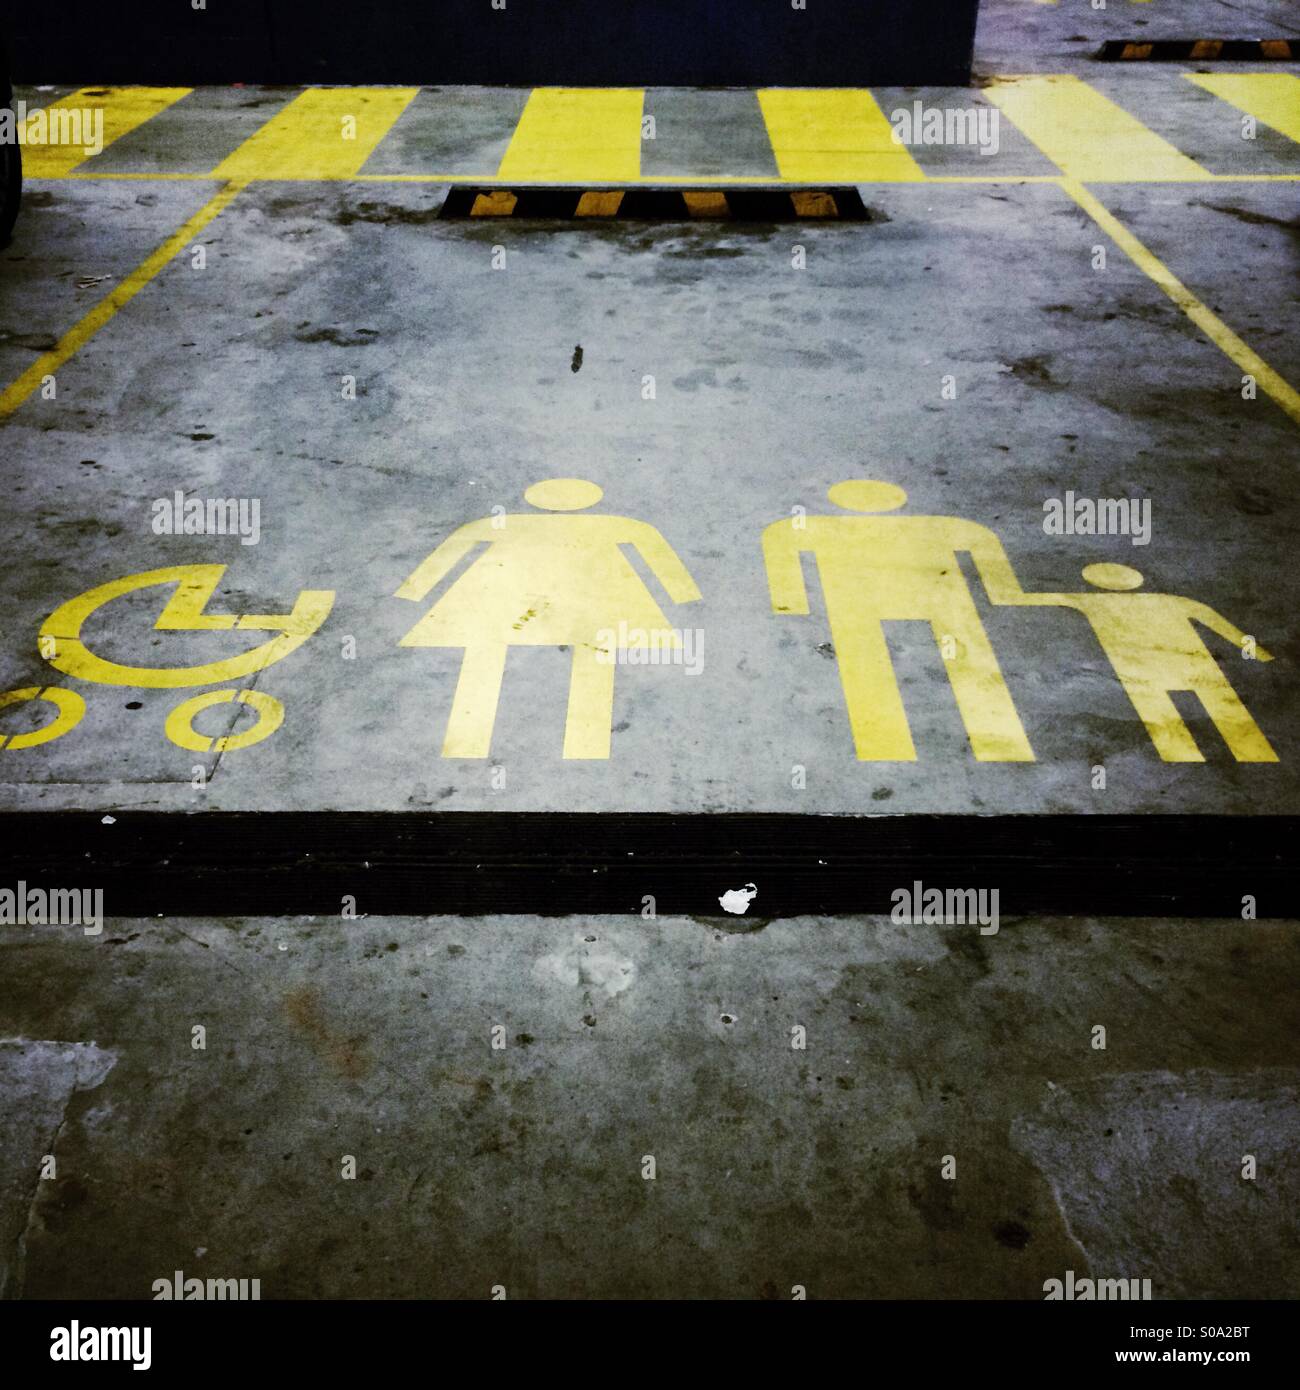 Parking spot reserved for families with prams Stock Photo